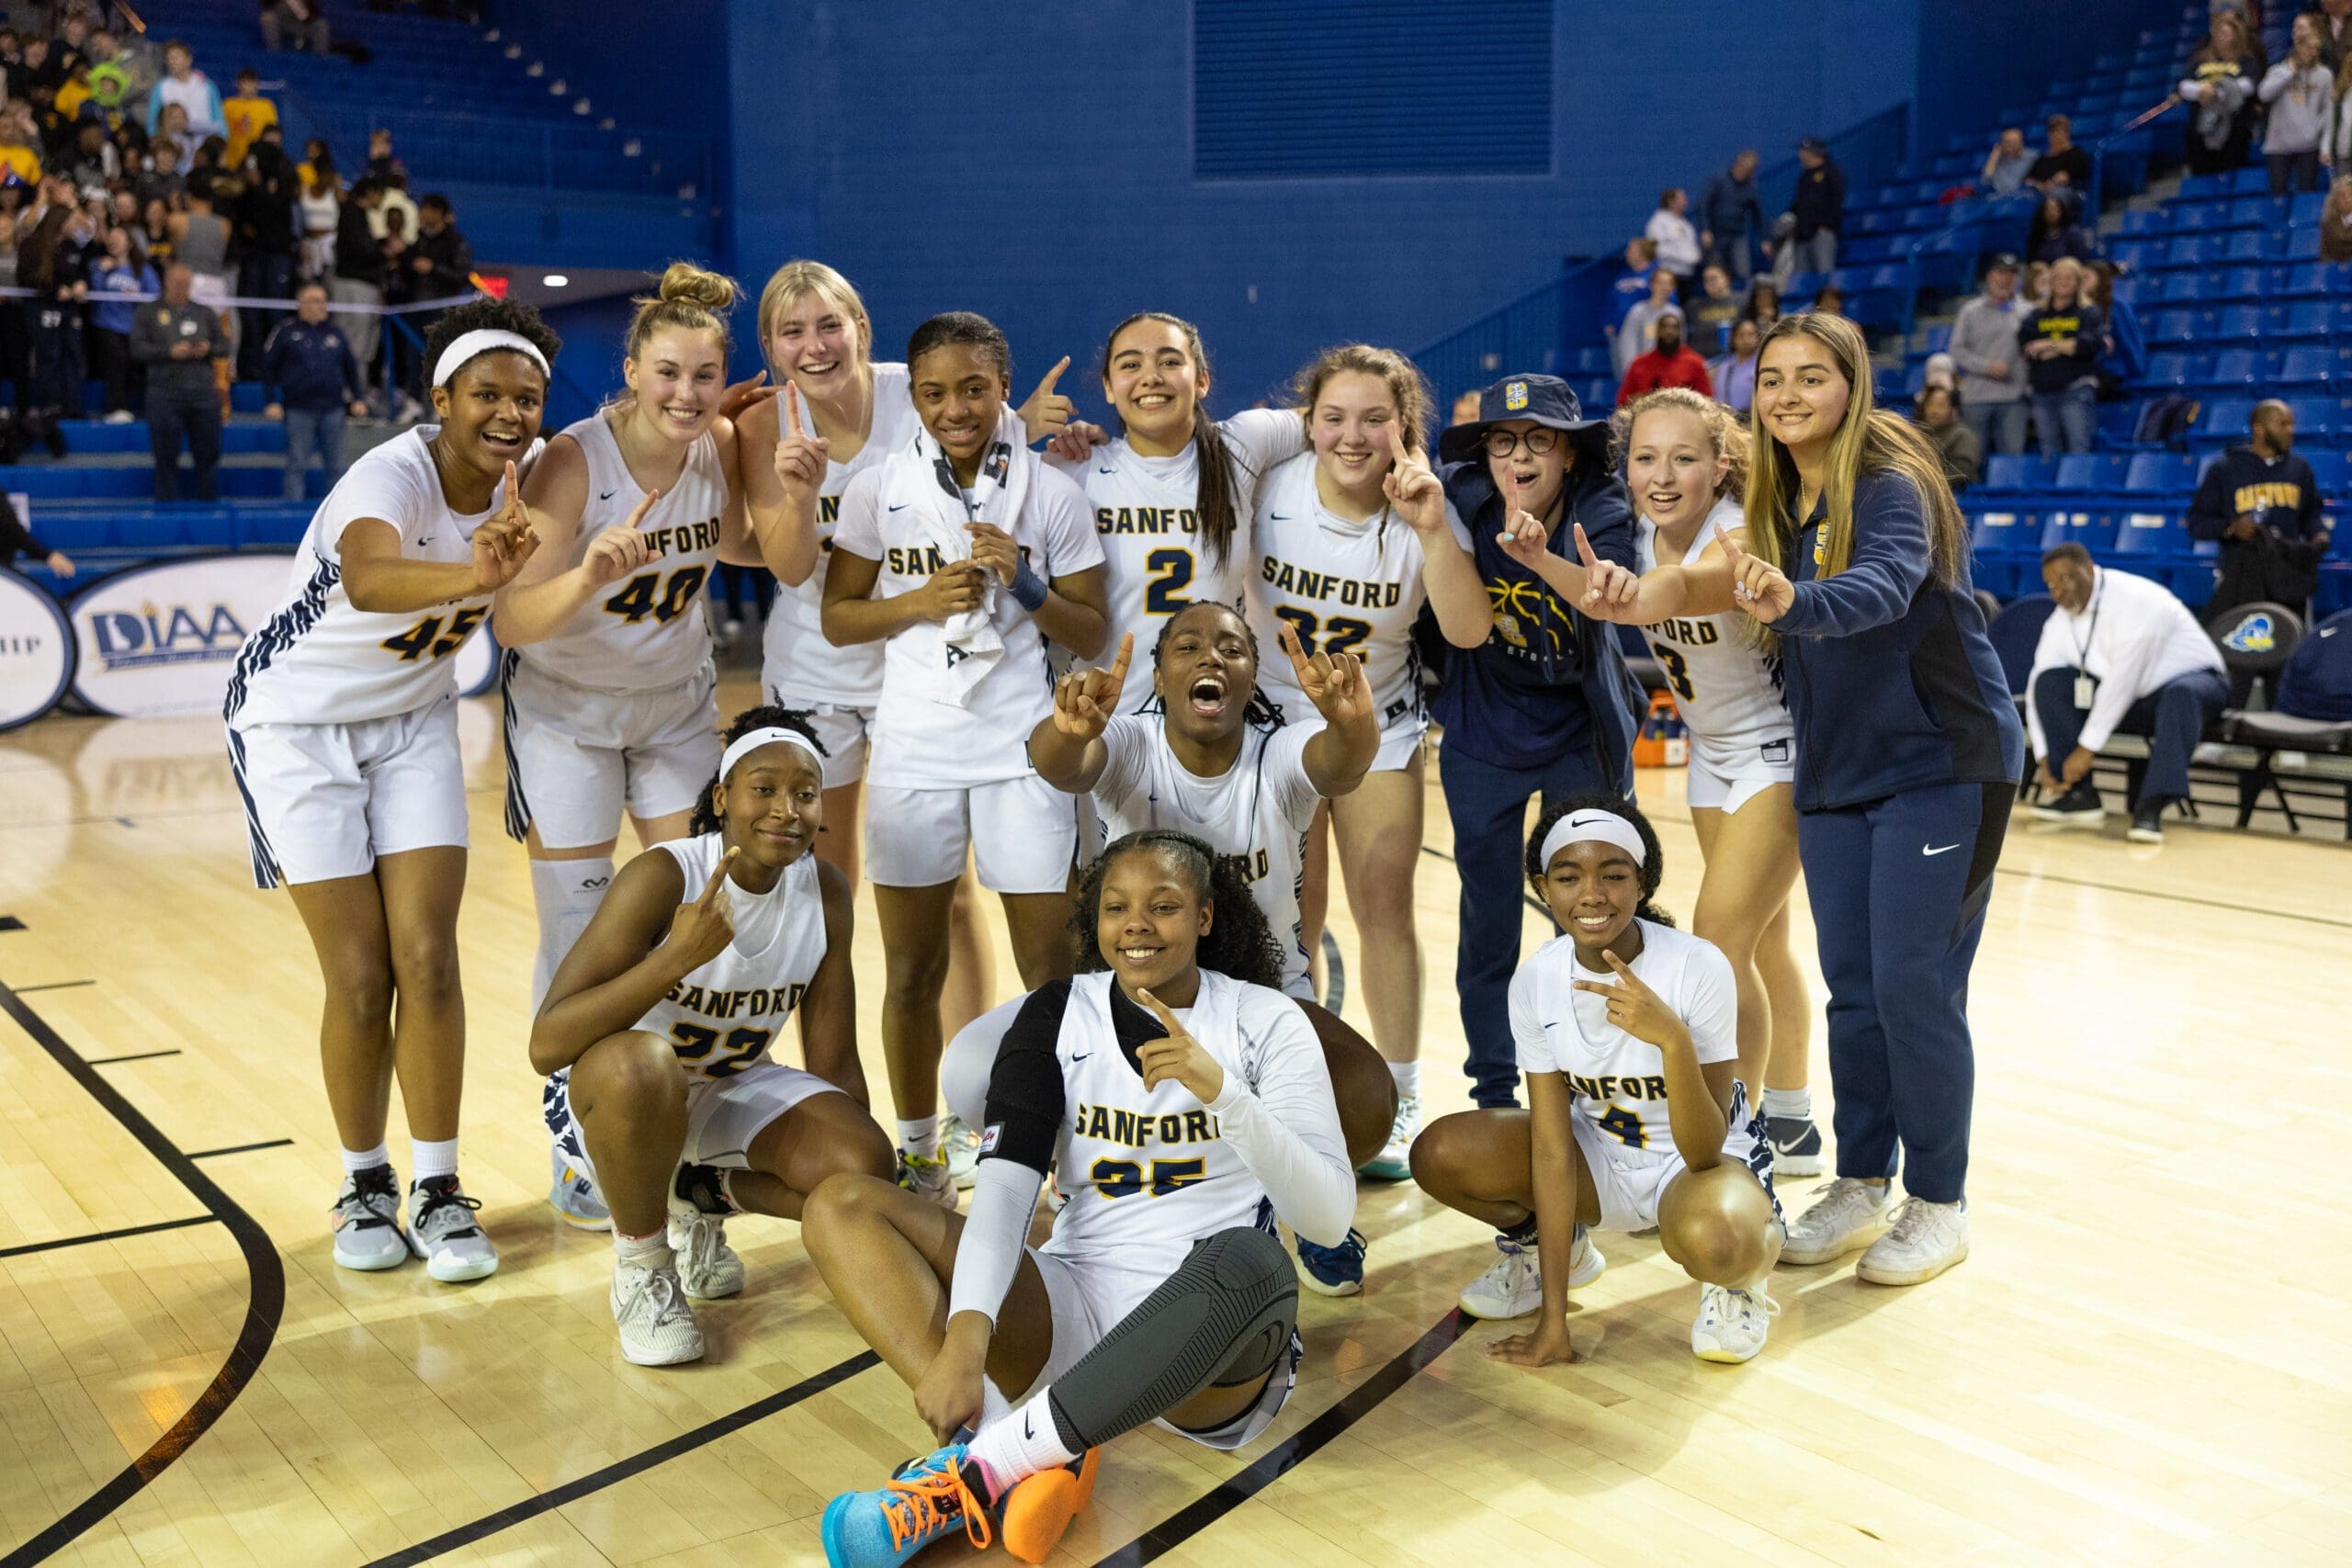 Featured image for “Sanford defeats Ursuline for state championship”